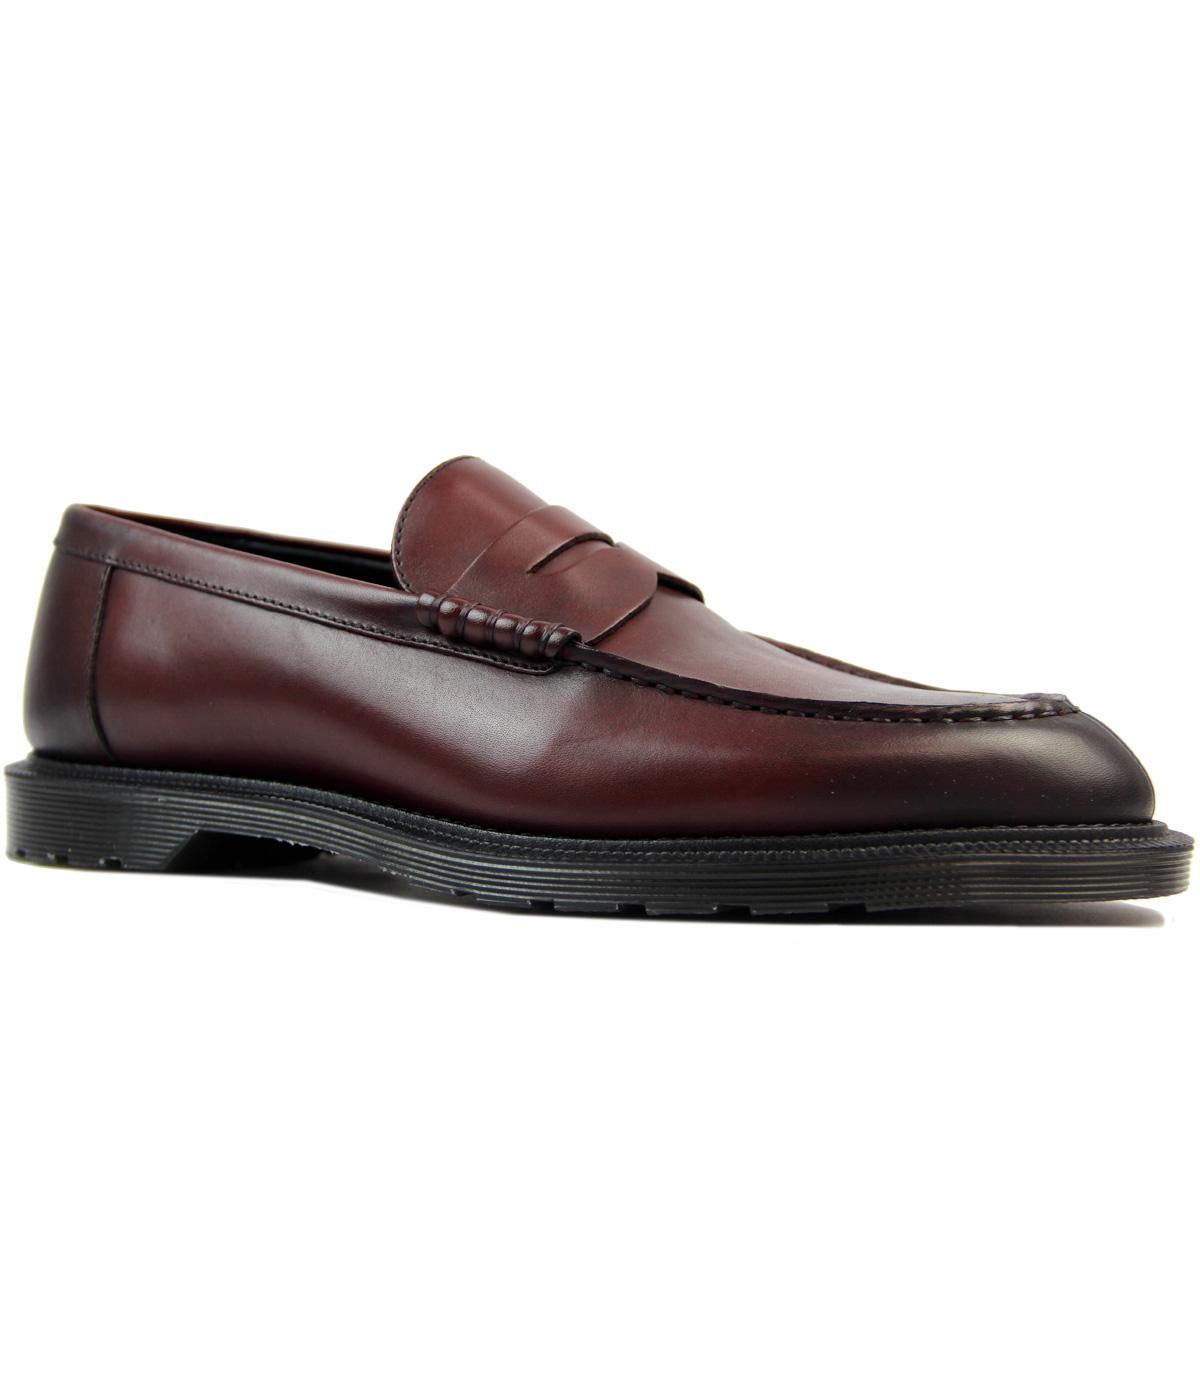 DR MARTENS Henley Penton Retro Leather Bar Loafers in Cherry